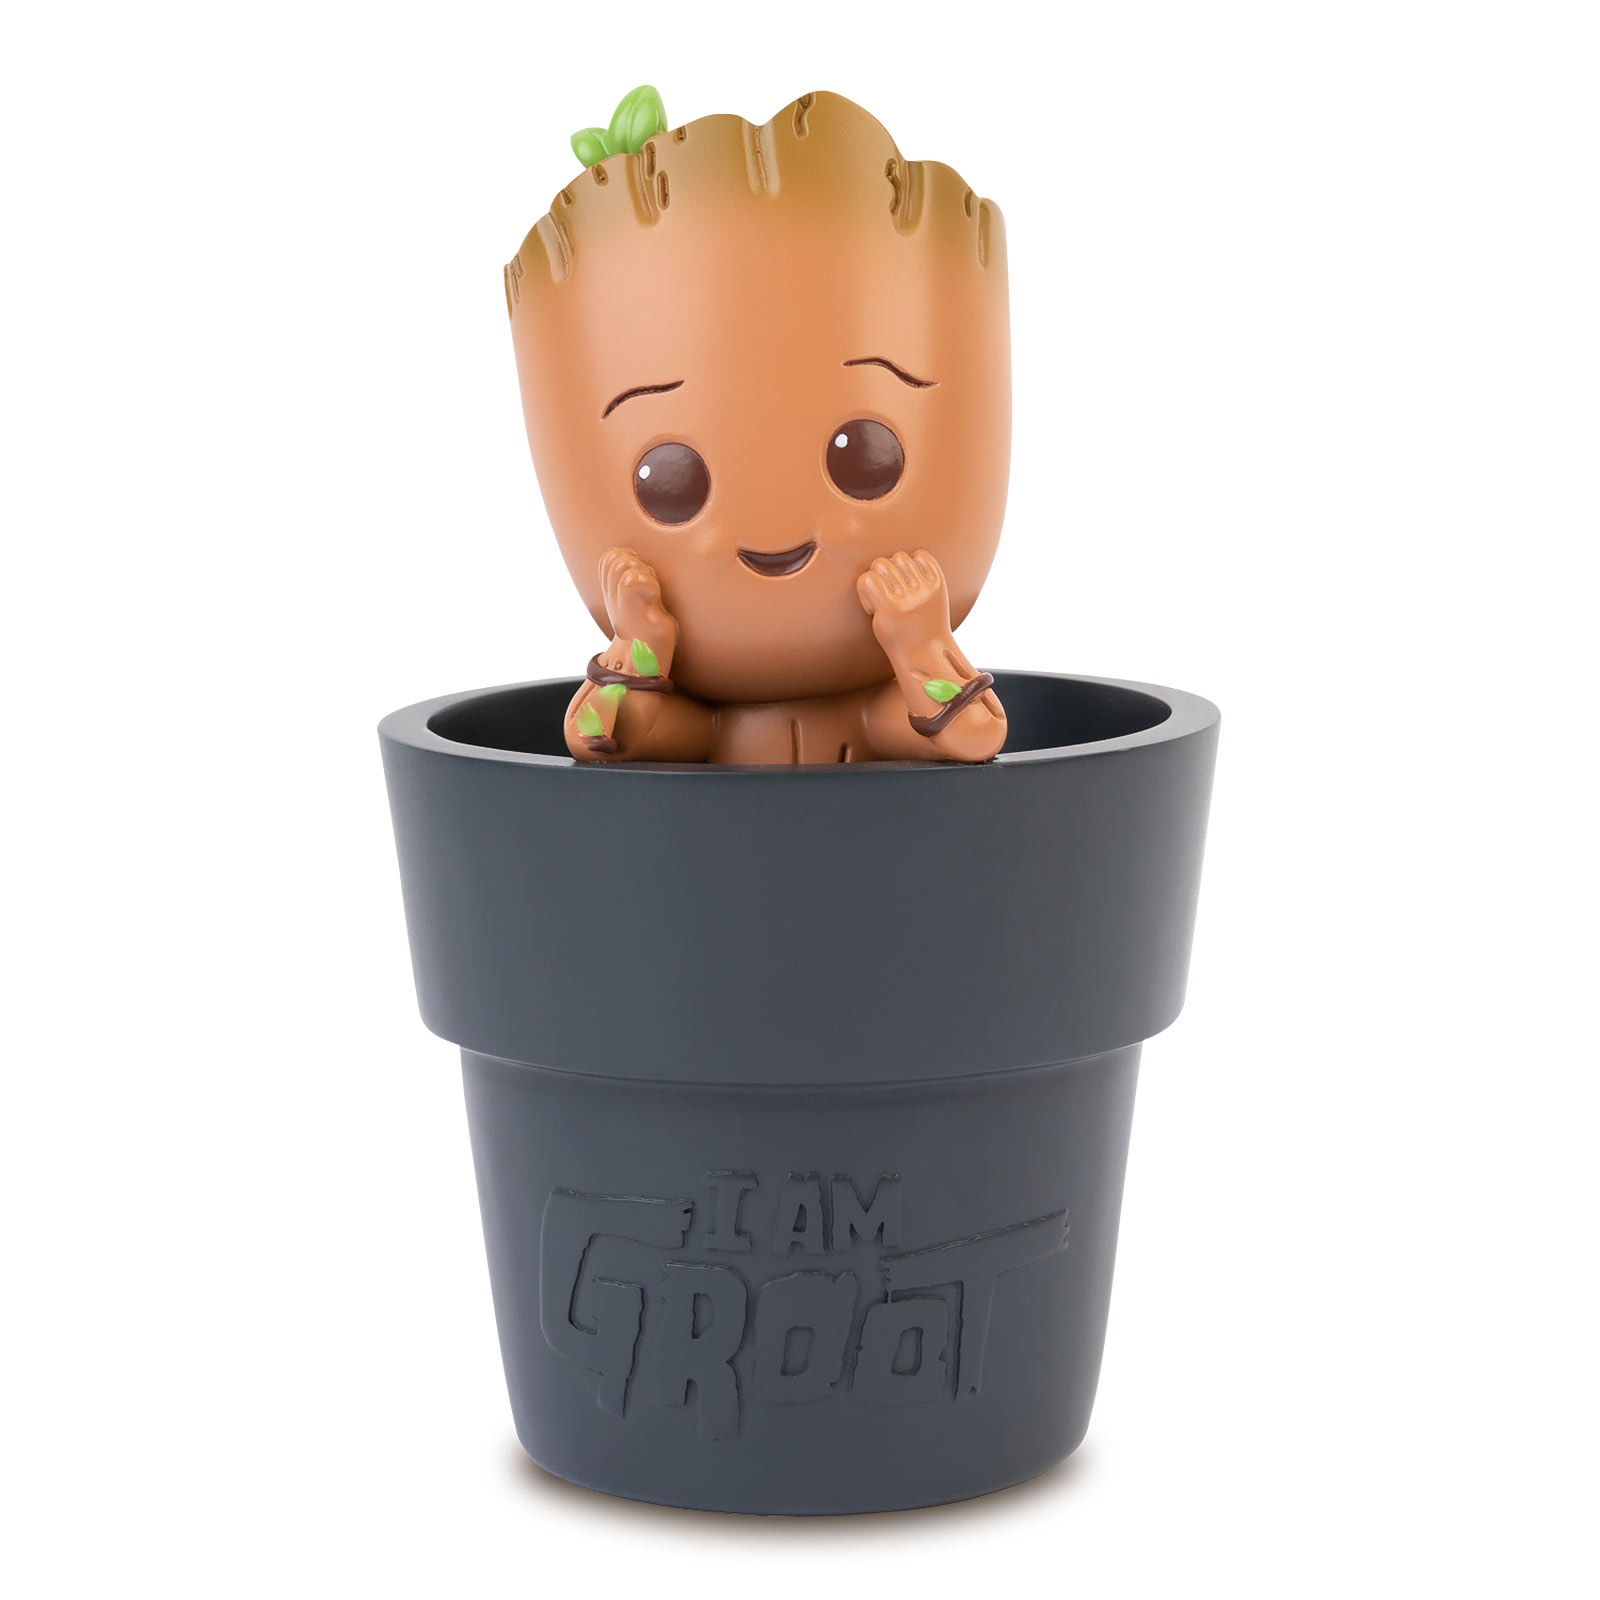 Guardians of the Galaxy - Groot Pen Holder